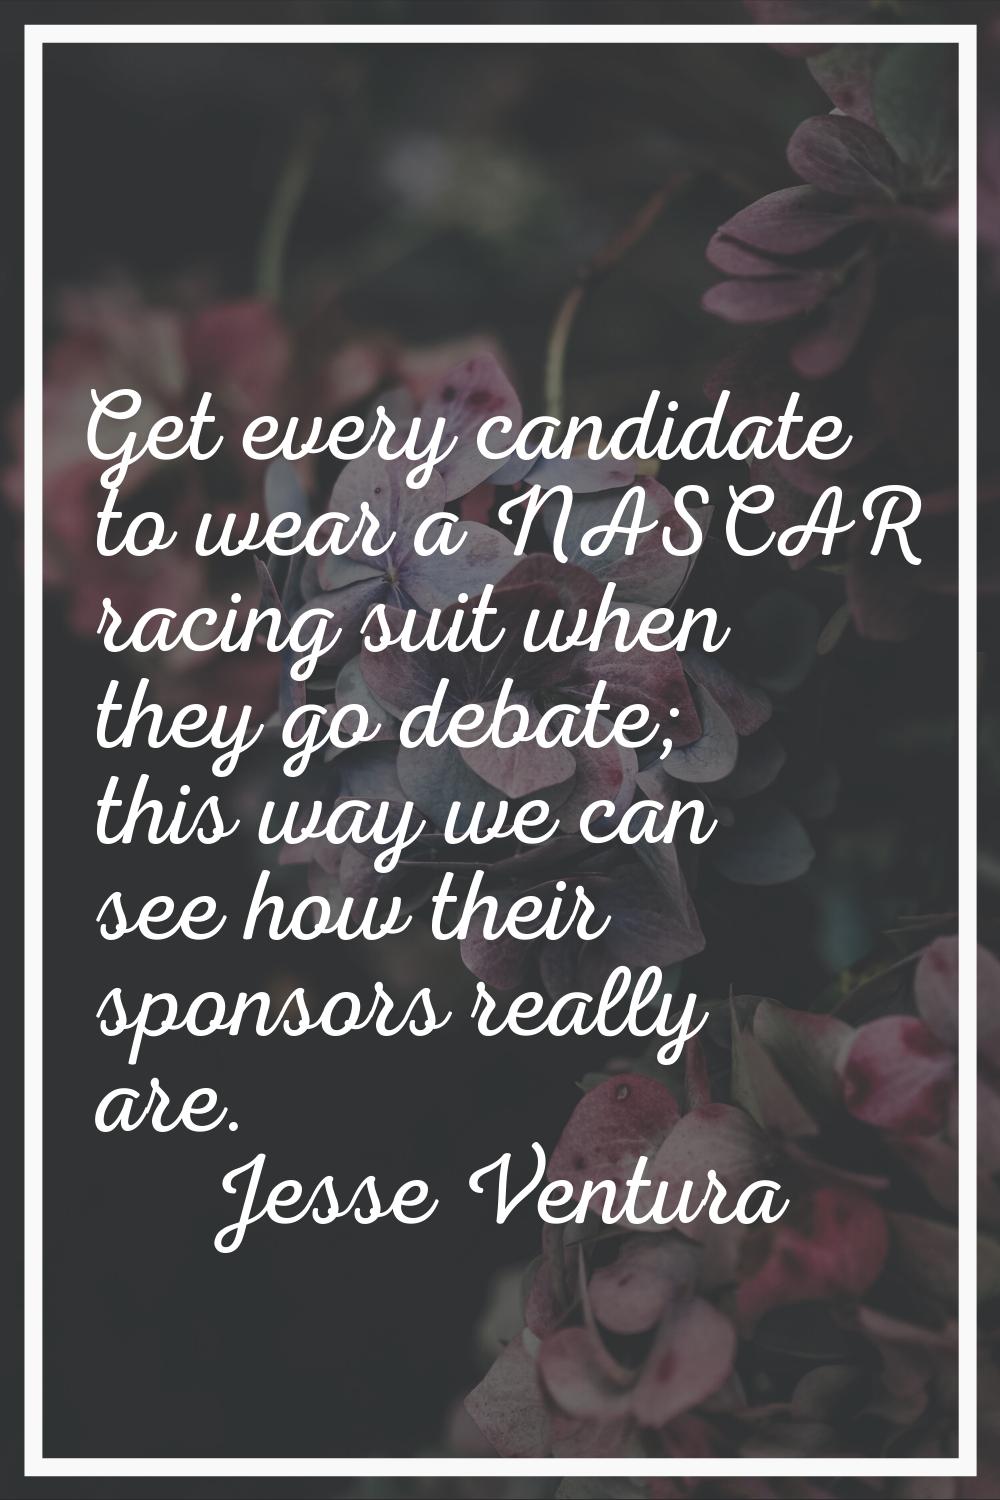 Get every candidate to wear a NASCAR racing suit when they go debate; this way we can see how their